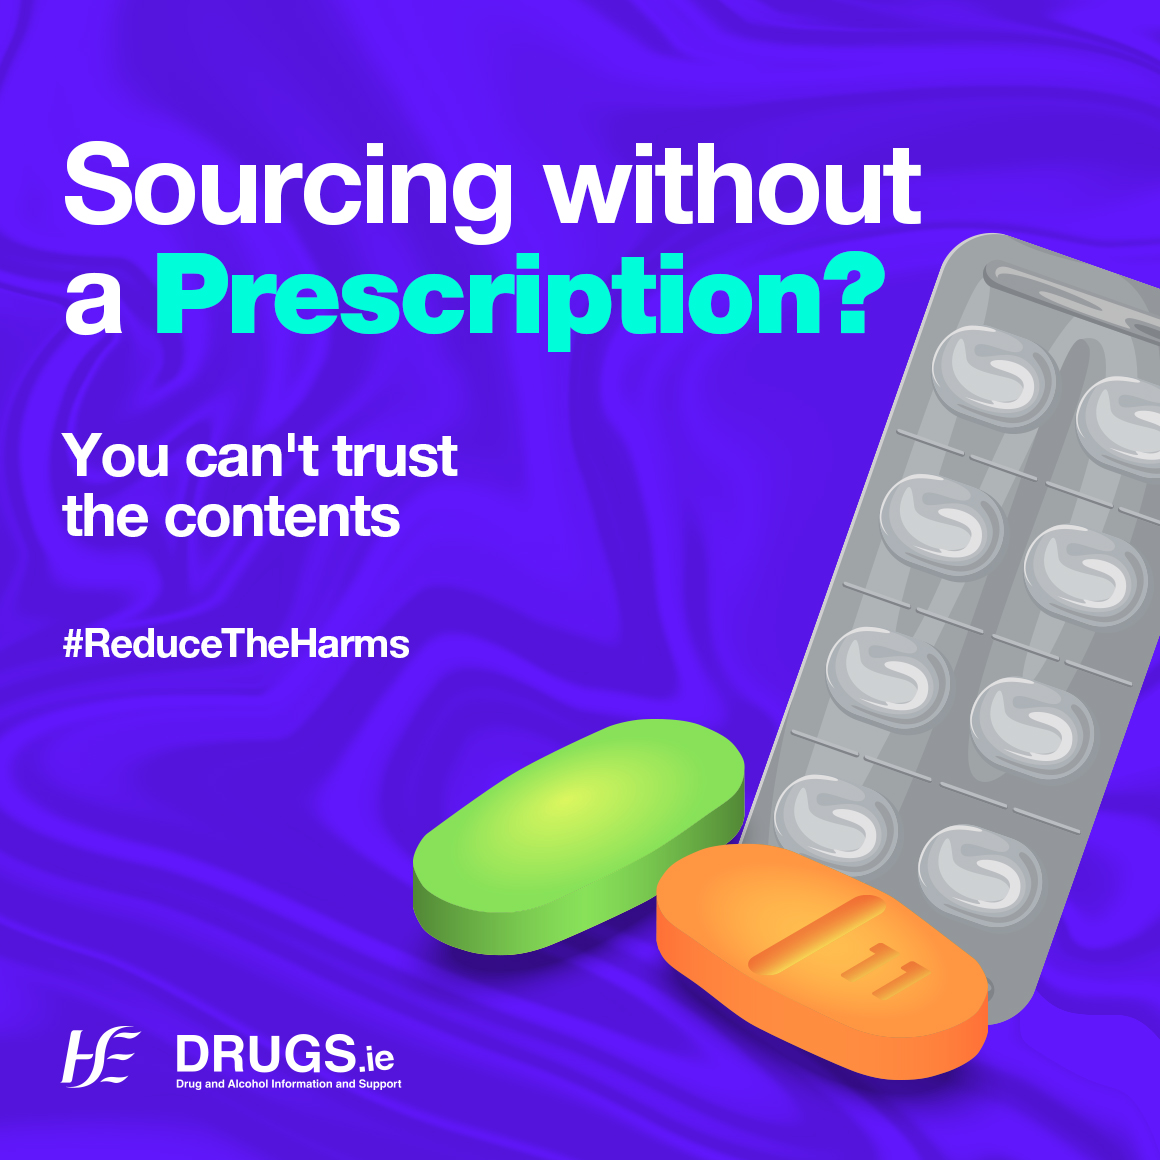 If you source benzodiazepines without a prescription, you can’t be sure of the contents. Tablets could contain new and risky types of drugs. Find out more about risks of buying benzos without a prescription here: bit.ly/4beRB3B